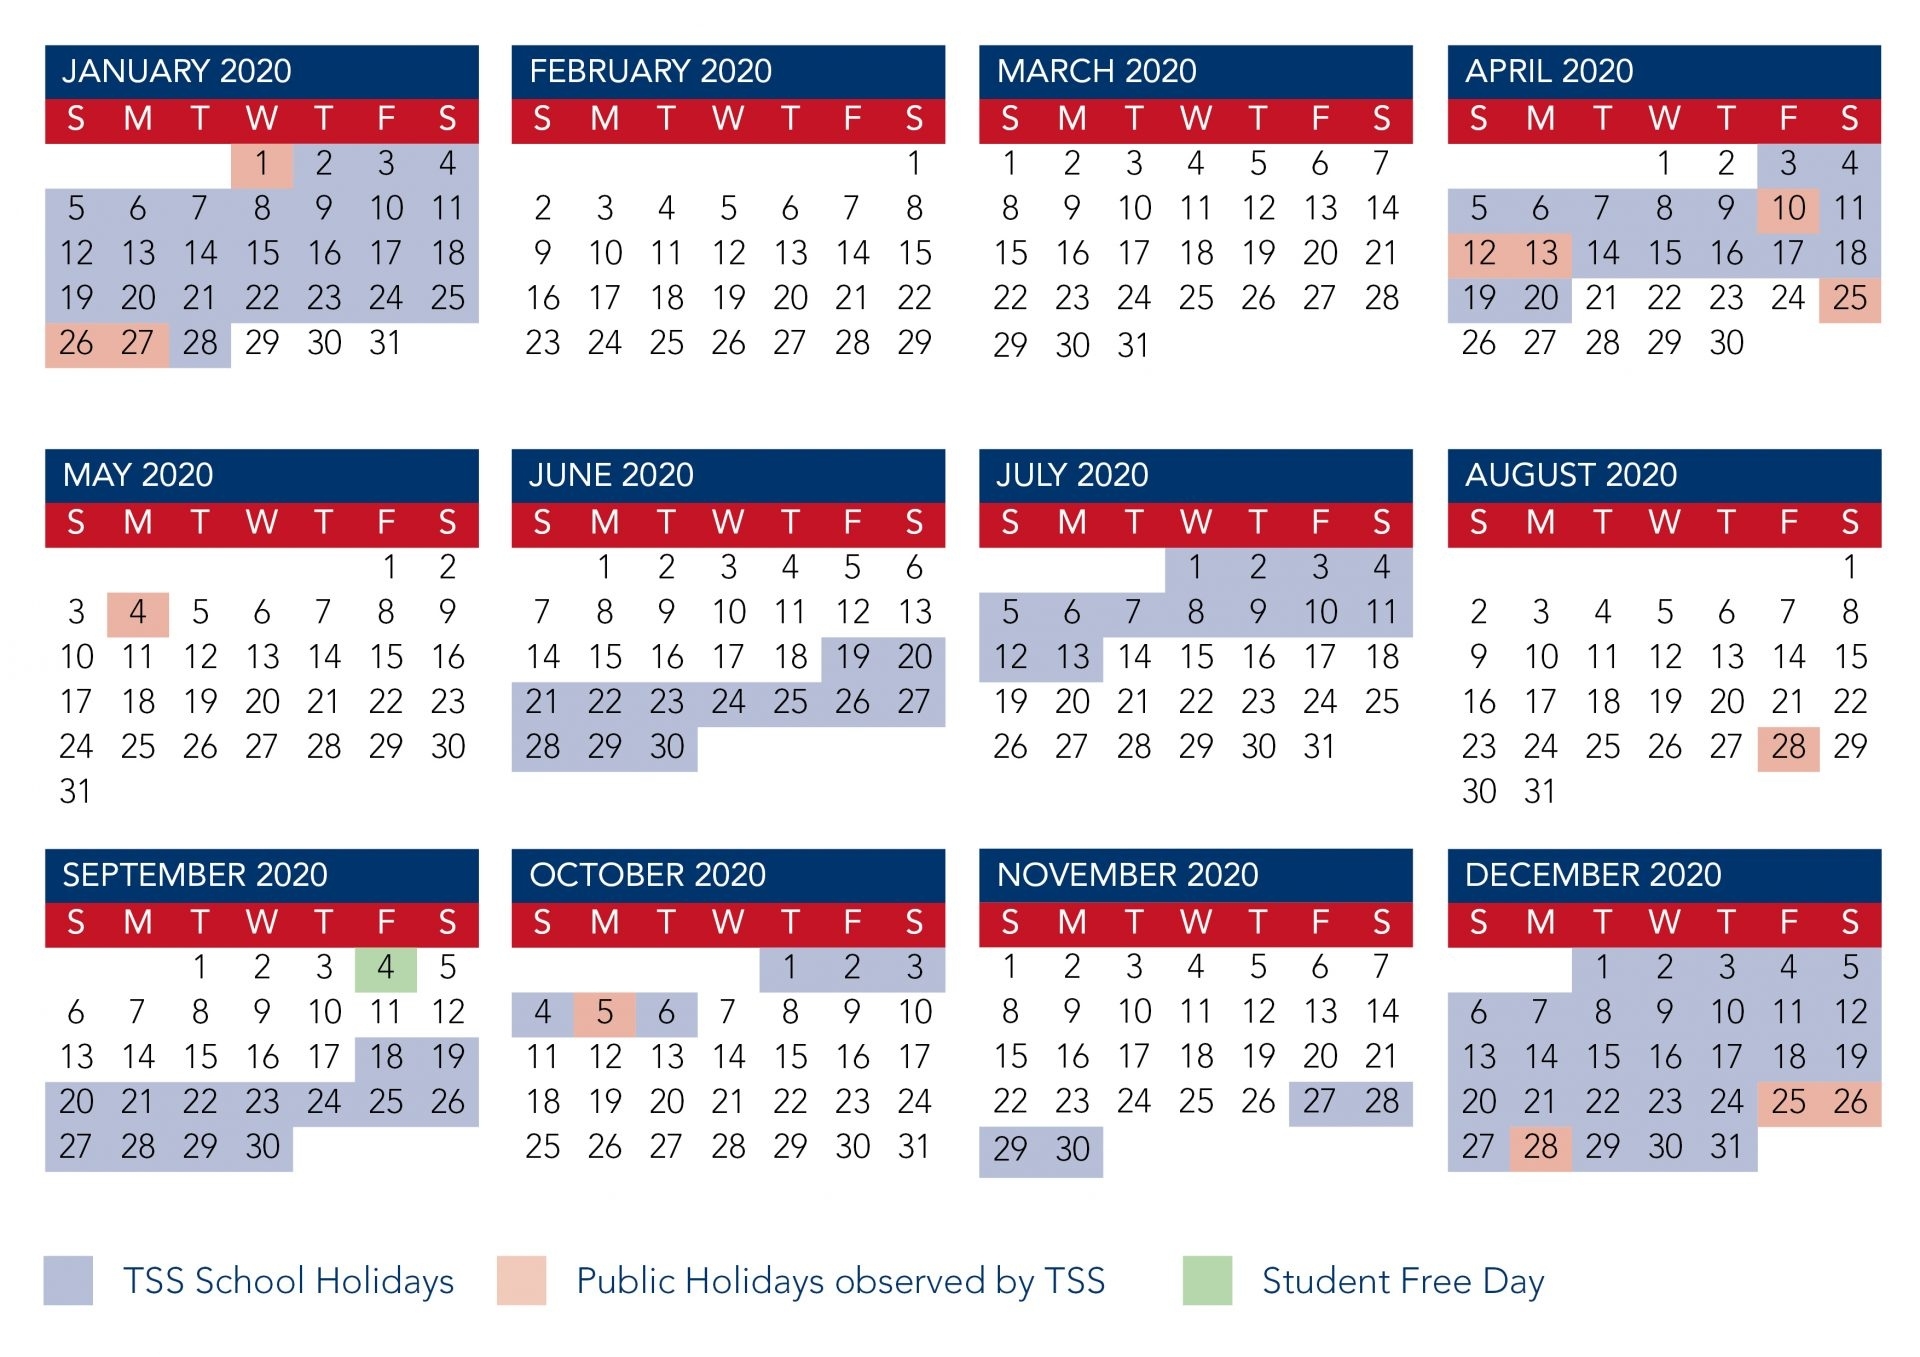 Calendar | The Southport School Incredible Calendar For Year 2020 Queensland With All Holidays